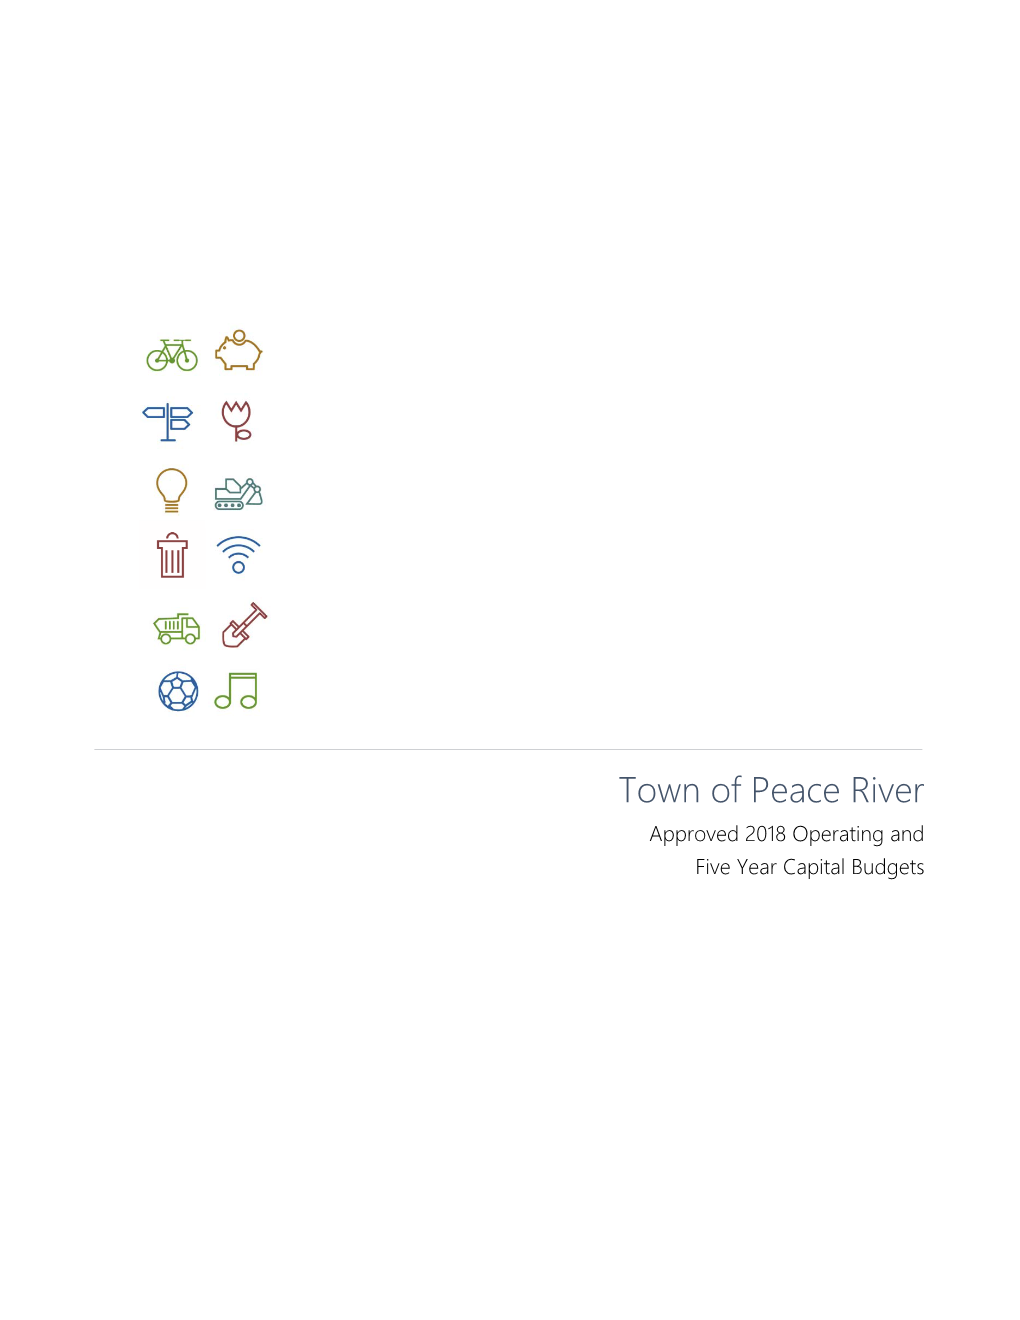 Town of Peace River Approved 2018 Operating and Five Year Capital Budgets